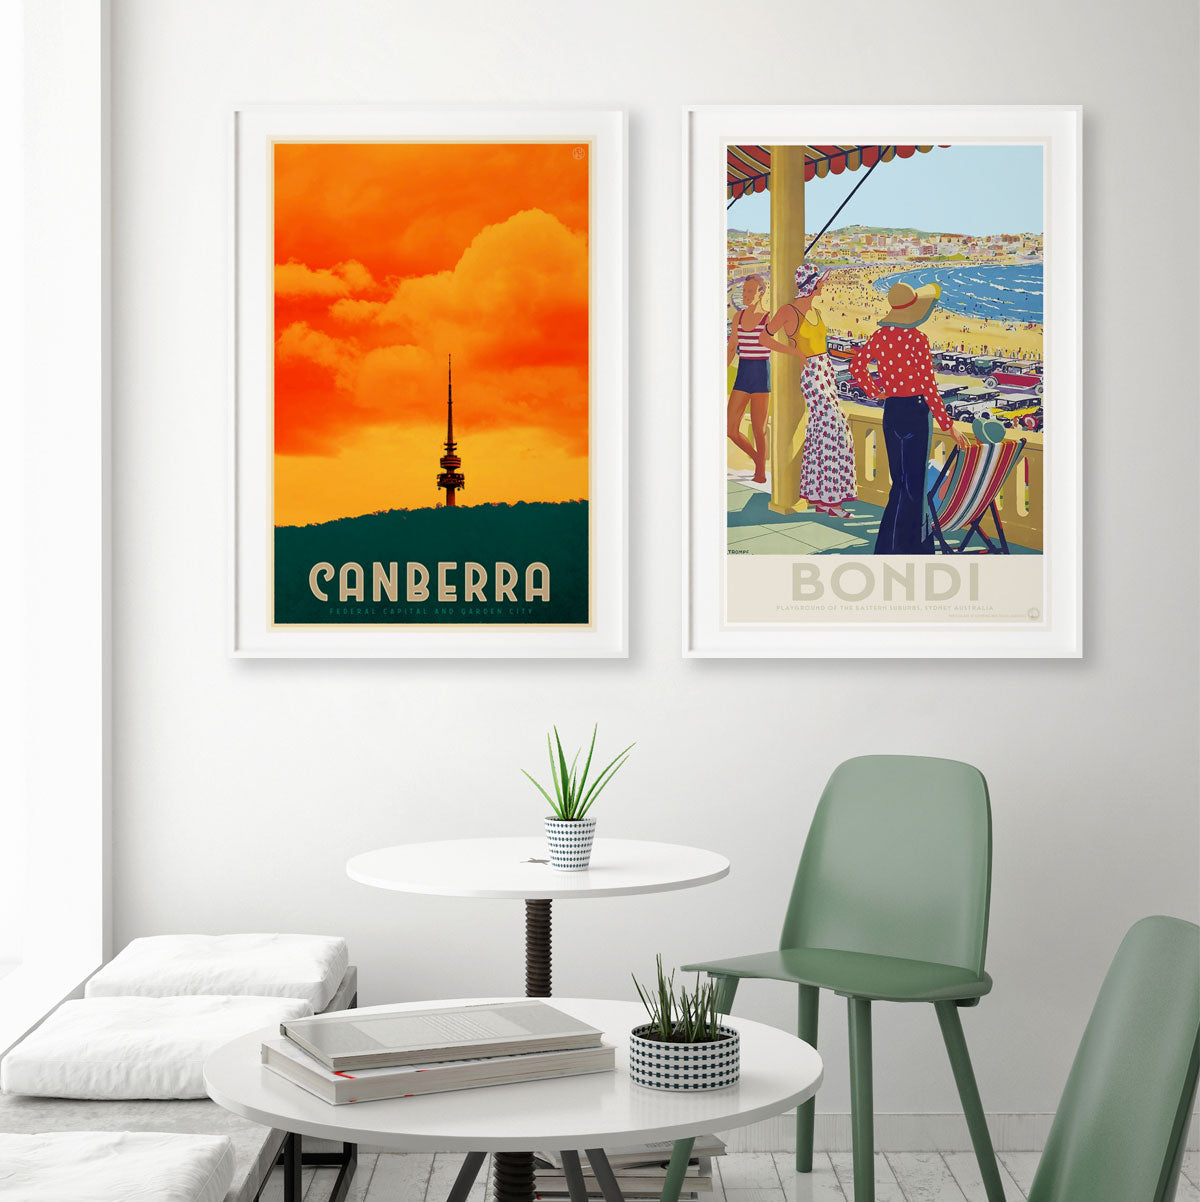 Save on vintage retro prints - by Places We Luv